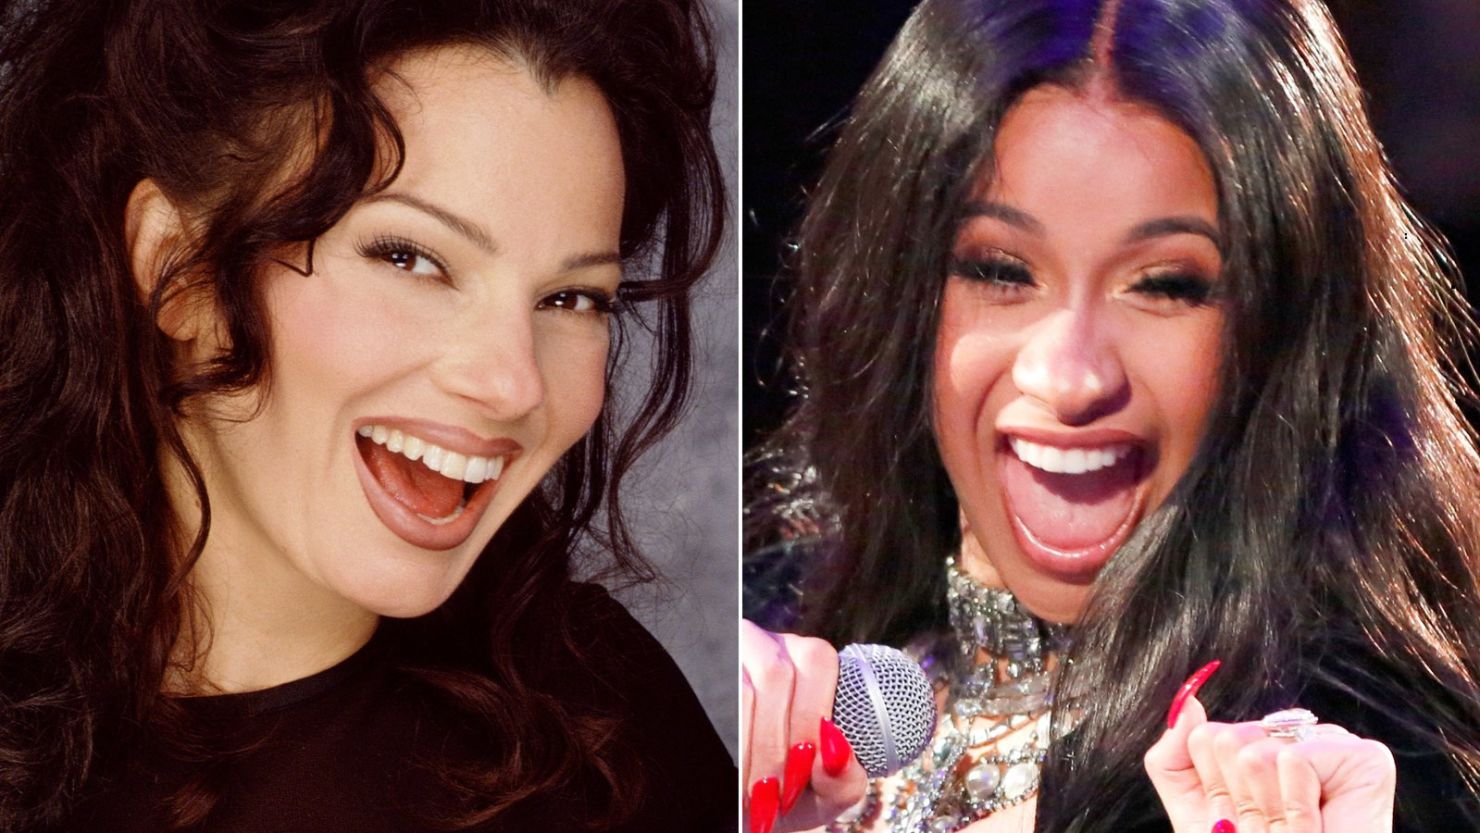 Fran Drescher and Cardi B may become family.